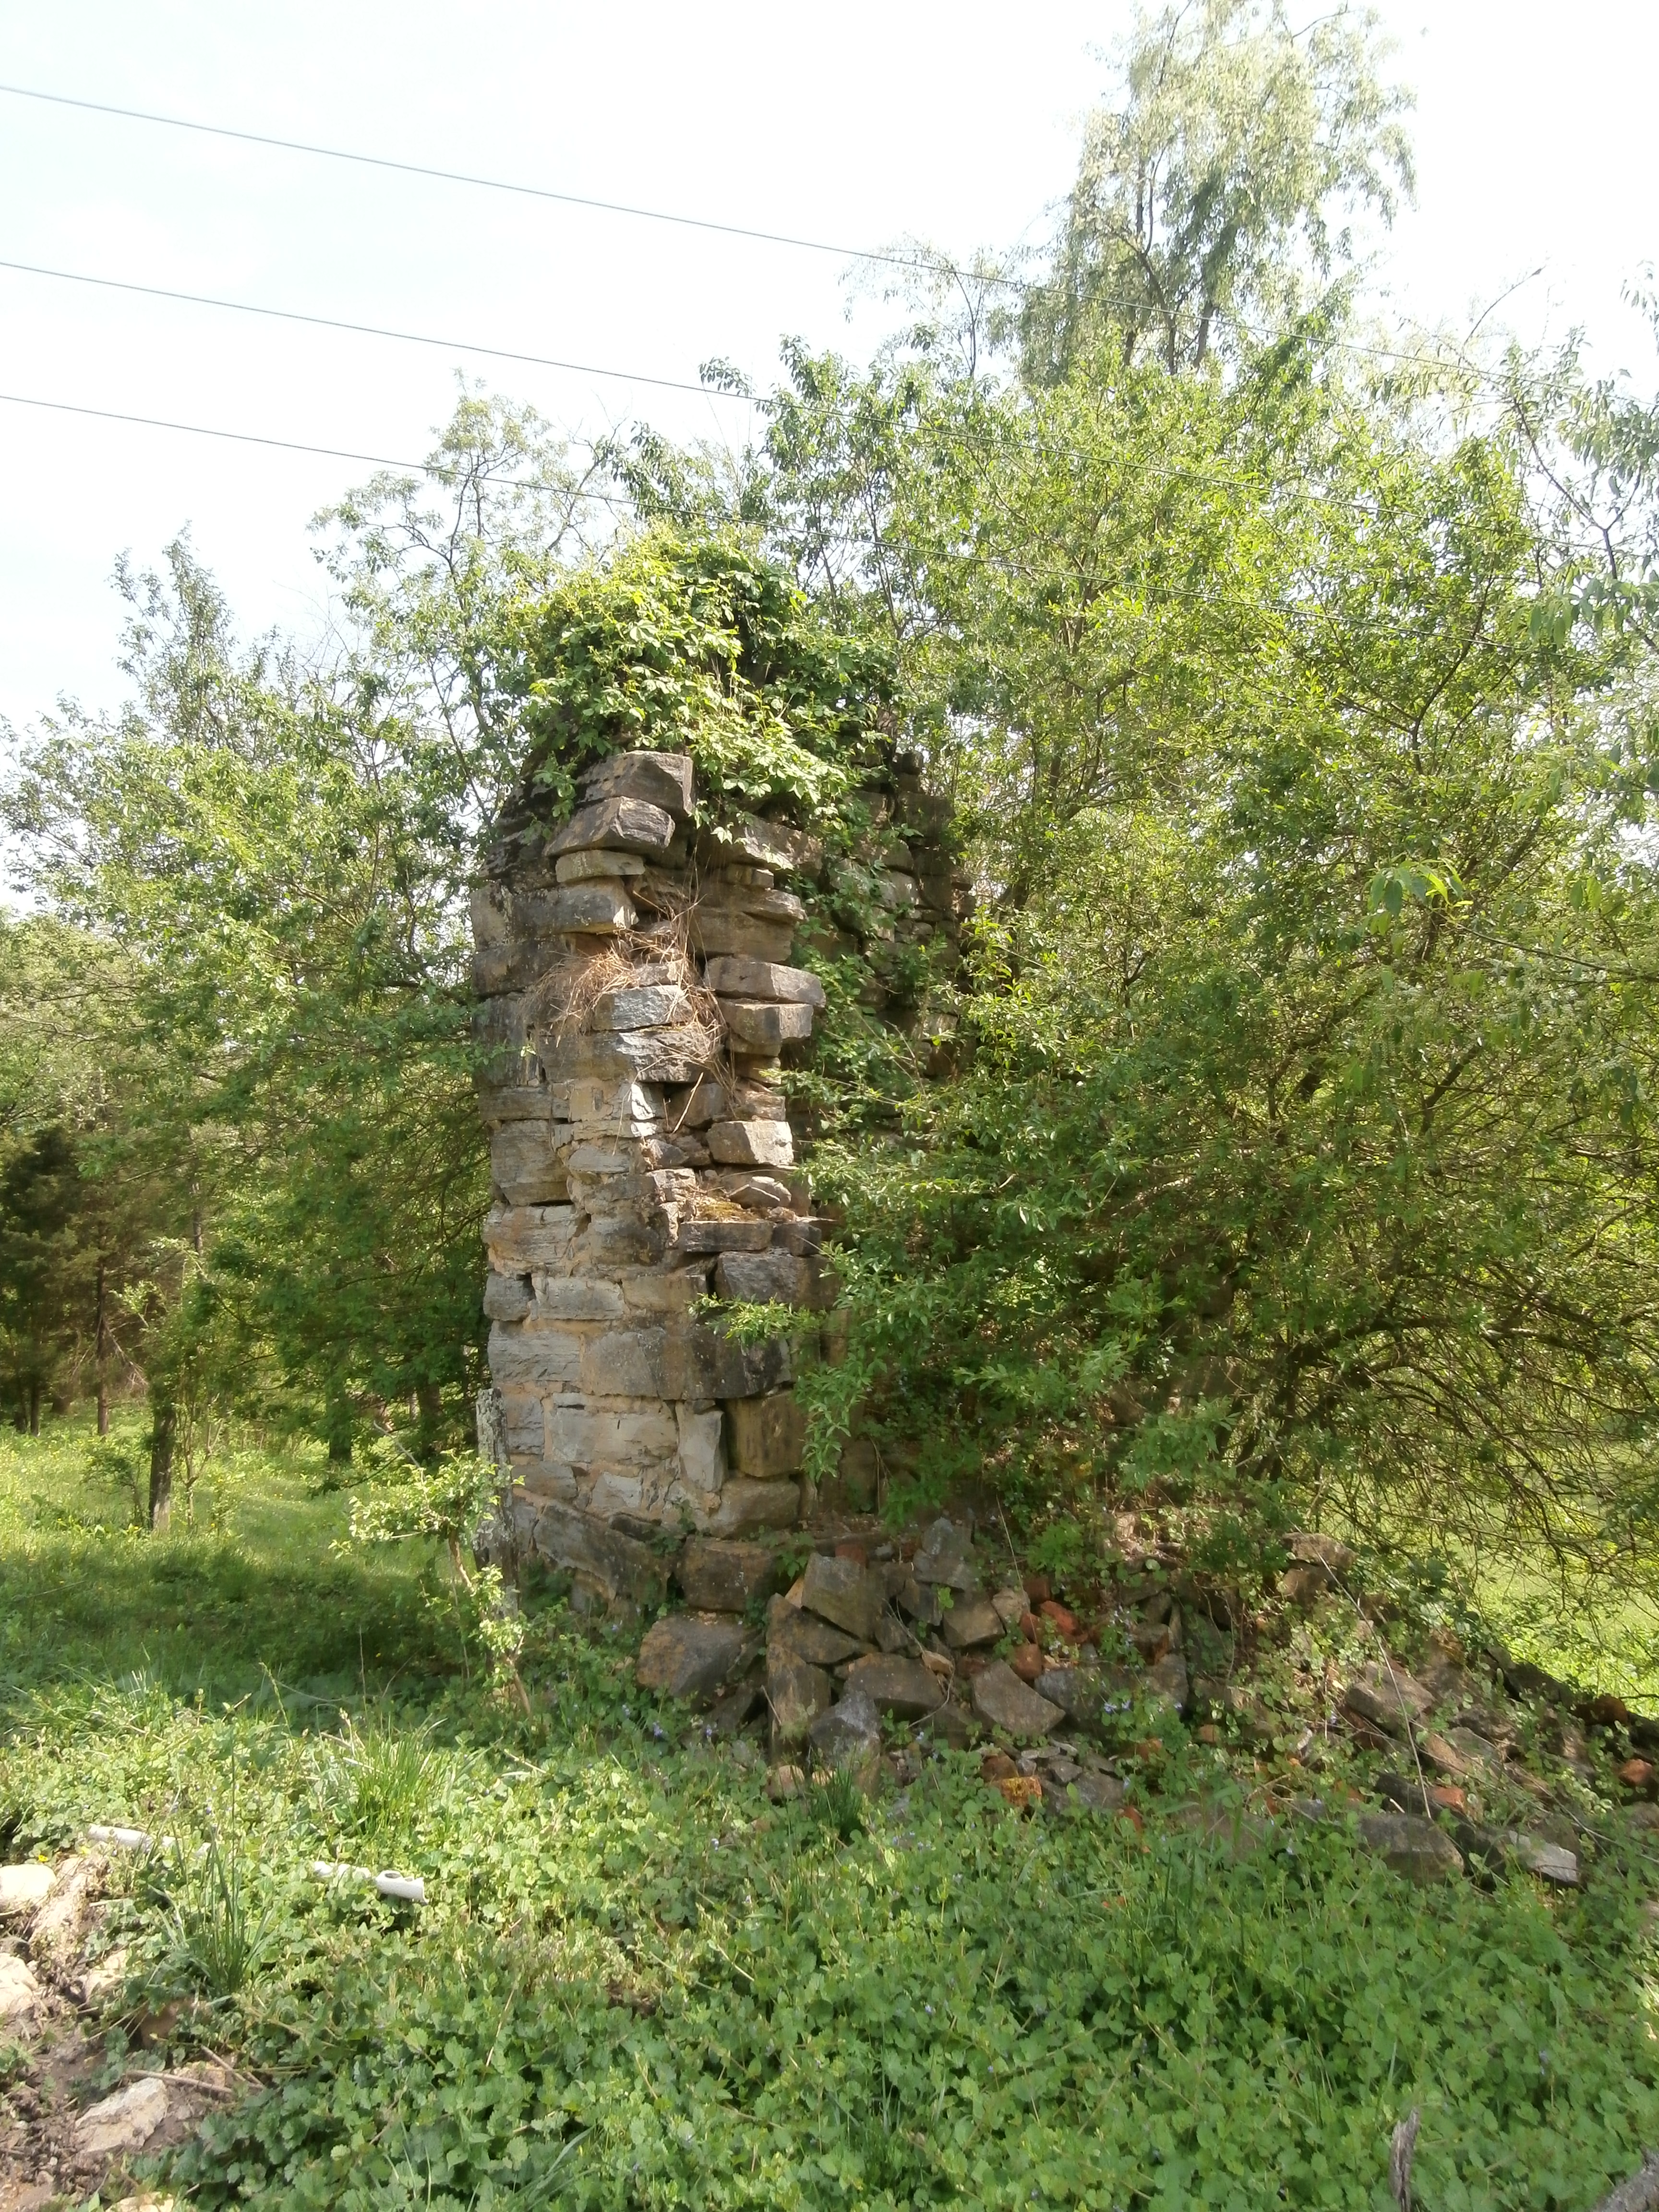 The Chimney of Buford’s Tavern and Location of the Beale Treasure